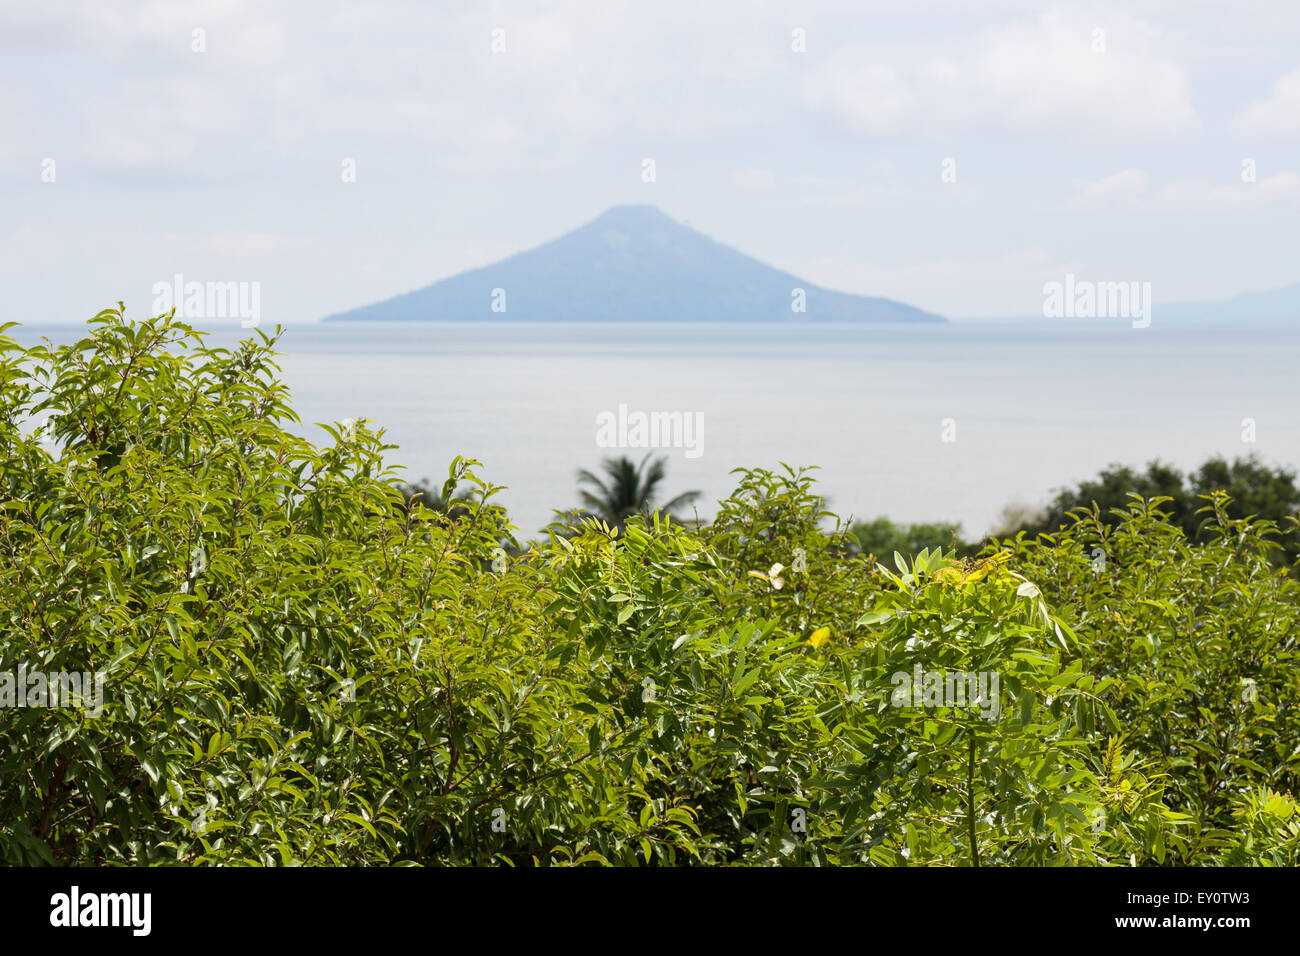 Momotombo volcano and Lake Managua viewed from the Ruins of León Viejo, Nicaragua Stock Photo